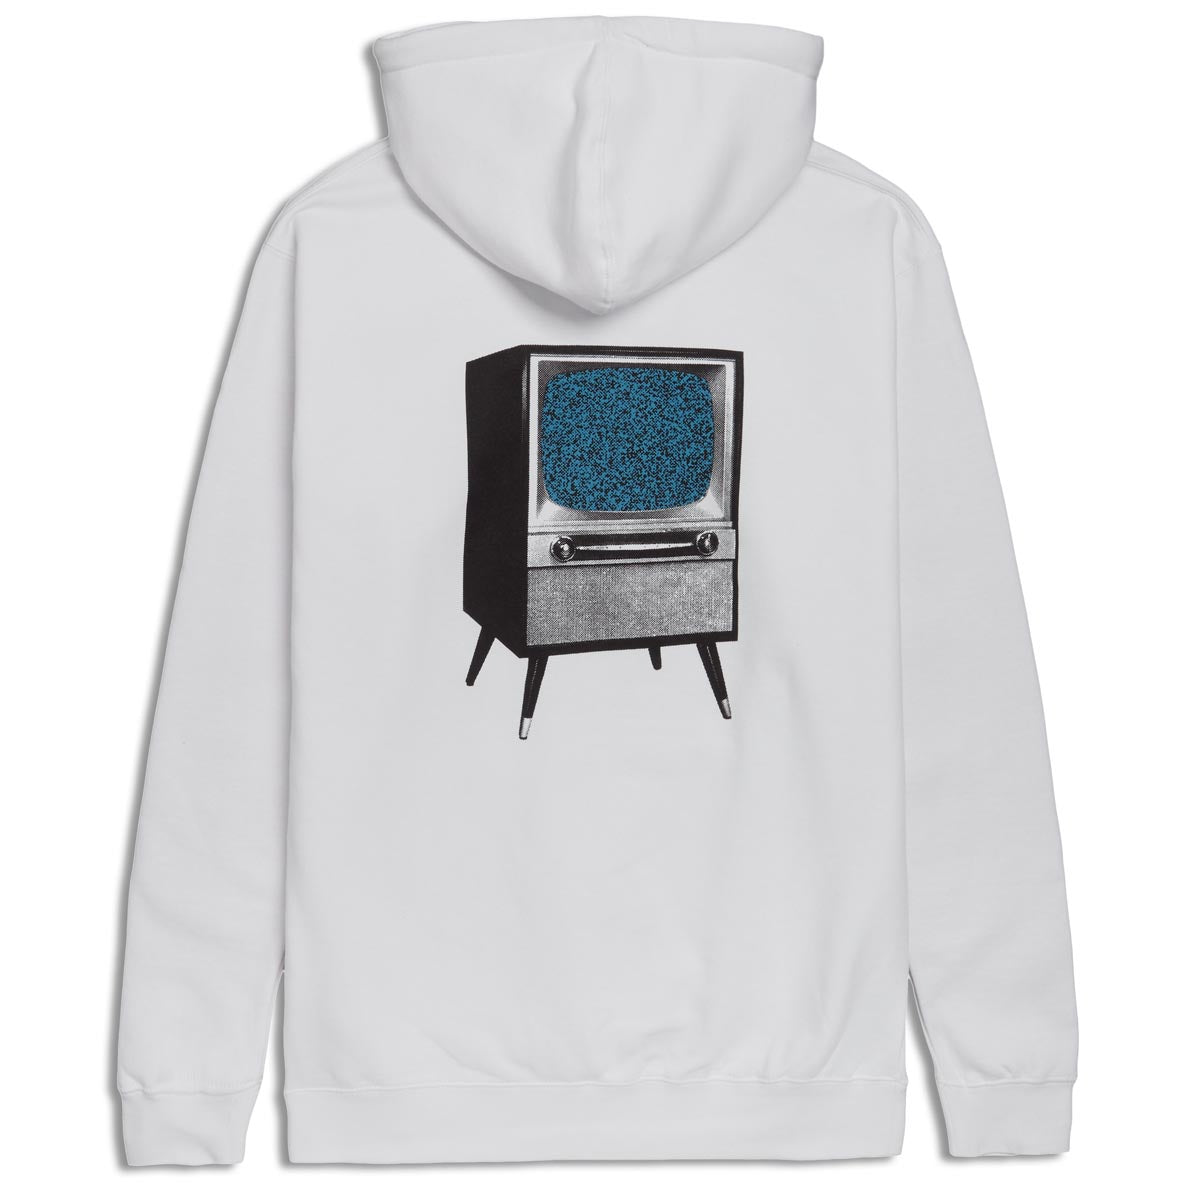 CCS Noise Hoodie - White image 1